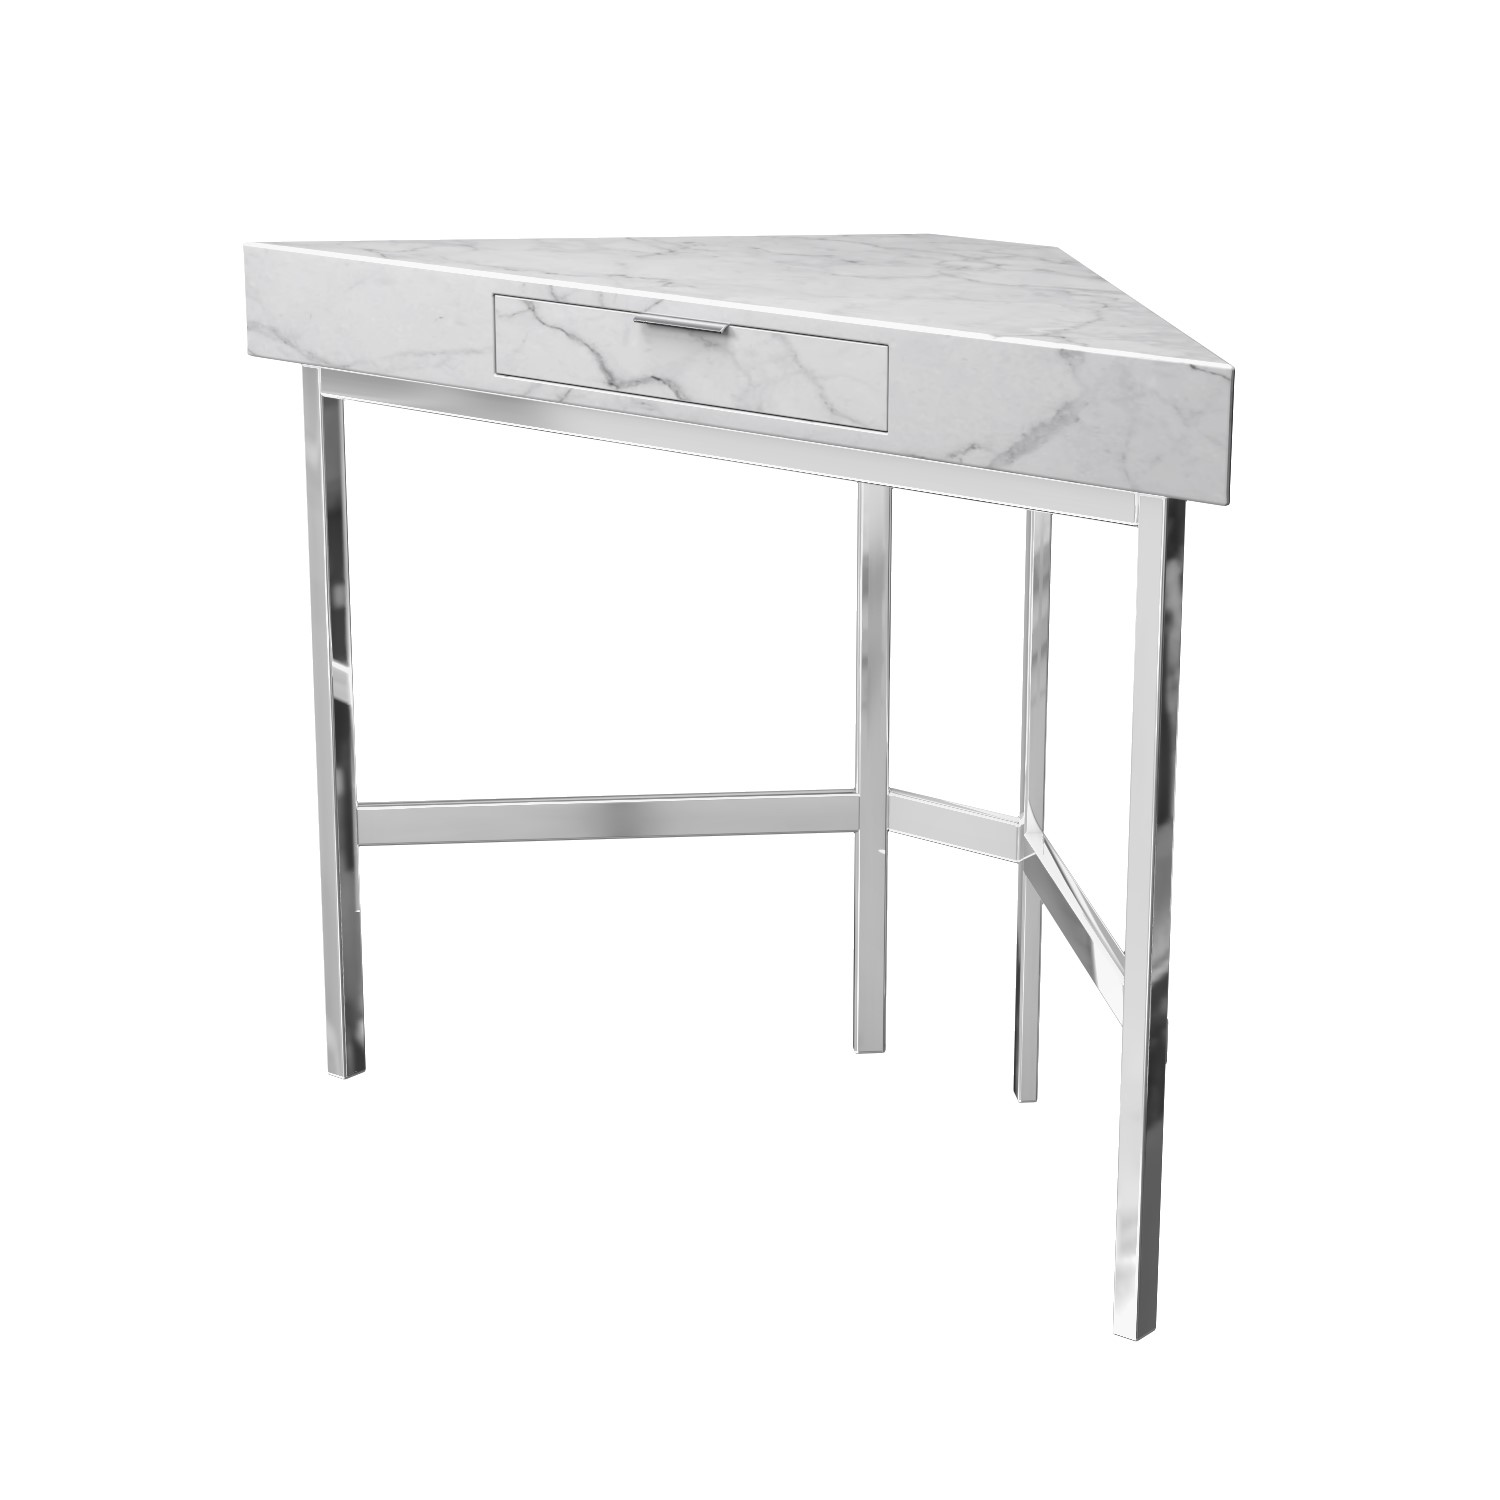 Photo of White marble top corner dressing table with chrome legs - roxy